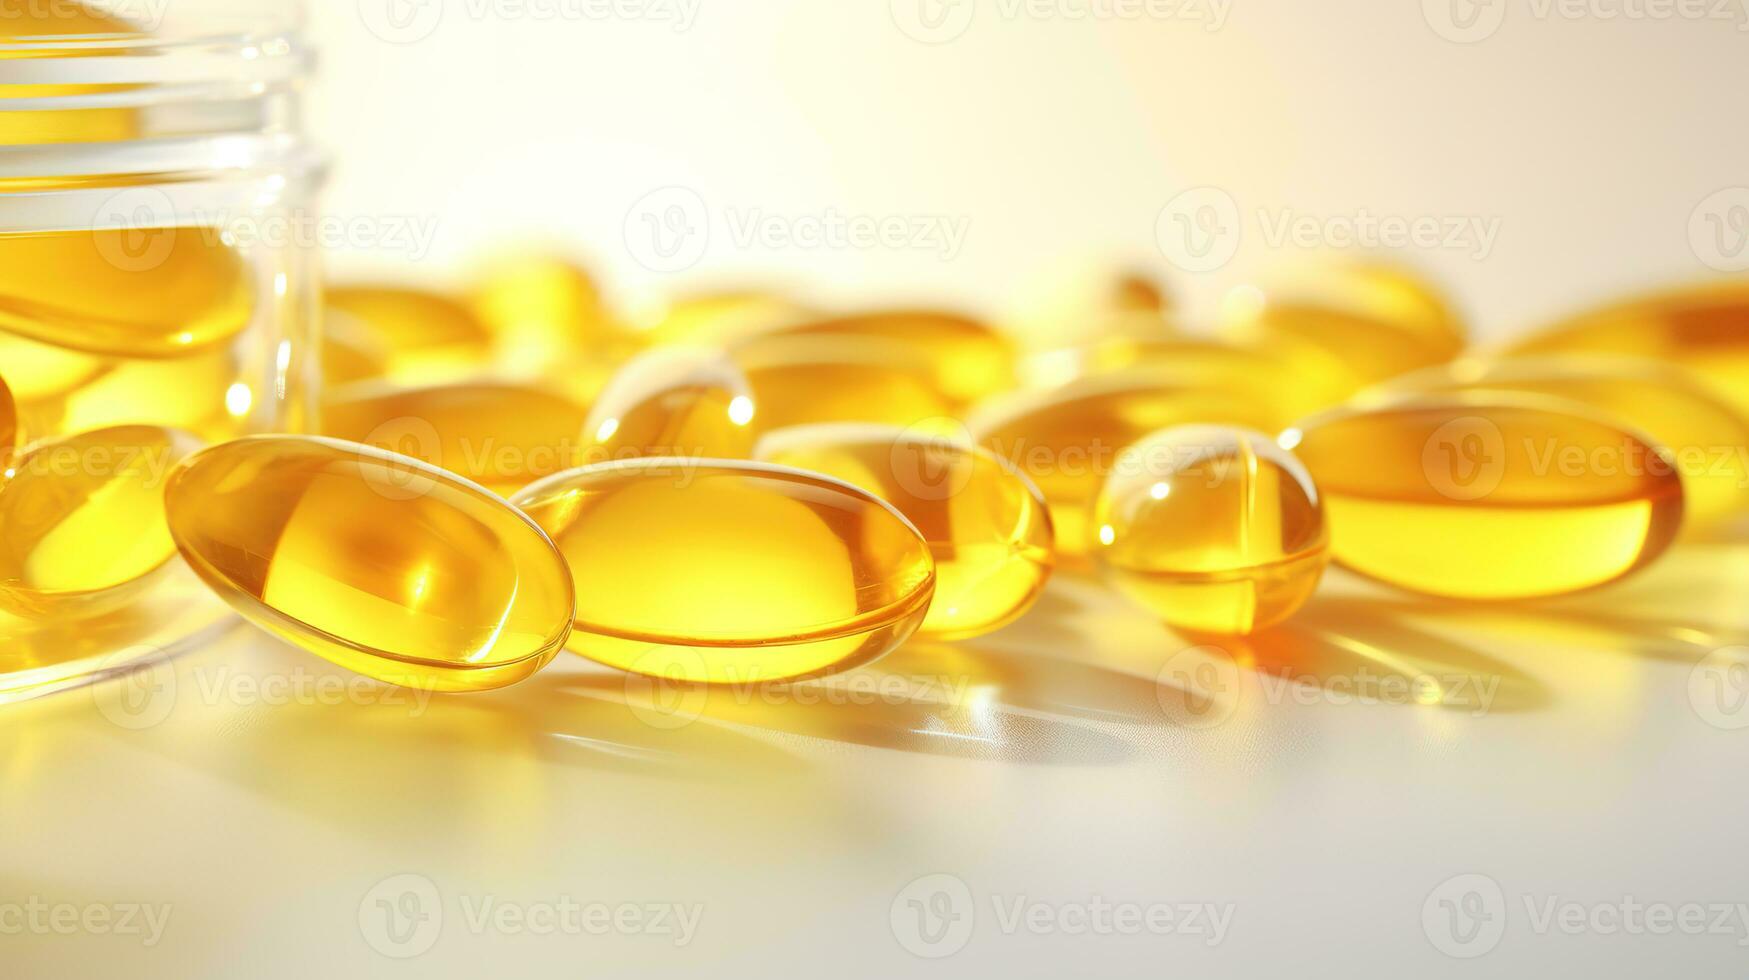 Transparent yellow vitamins on a light background. Vitamin D, omega 3, omega 6, Food supplement oil filled fish oil, vitamin A, vitamin E, flaxseed oil. photo